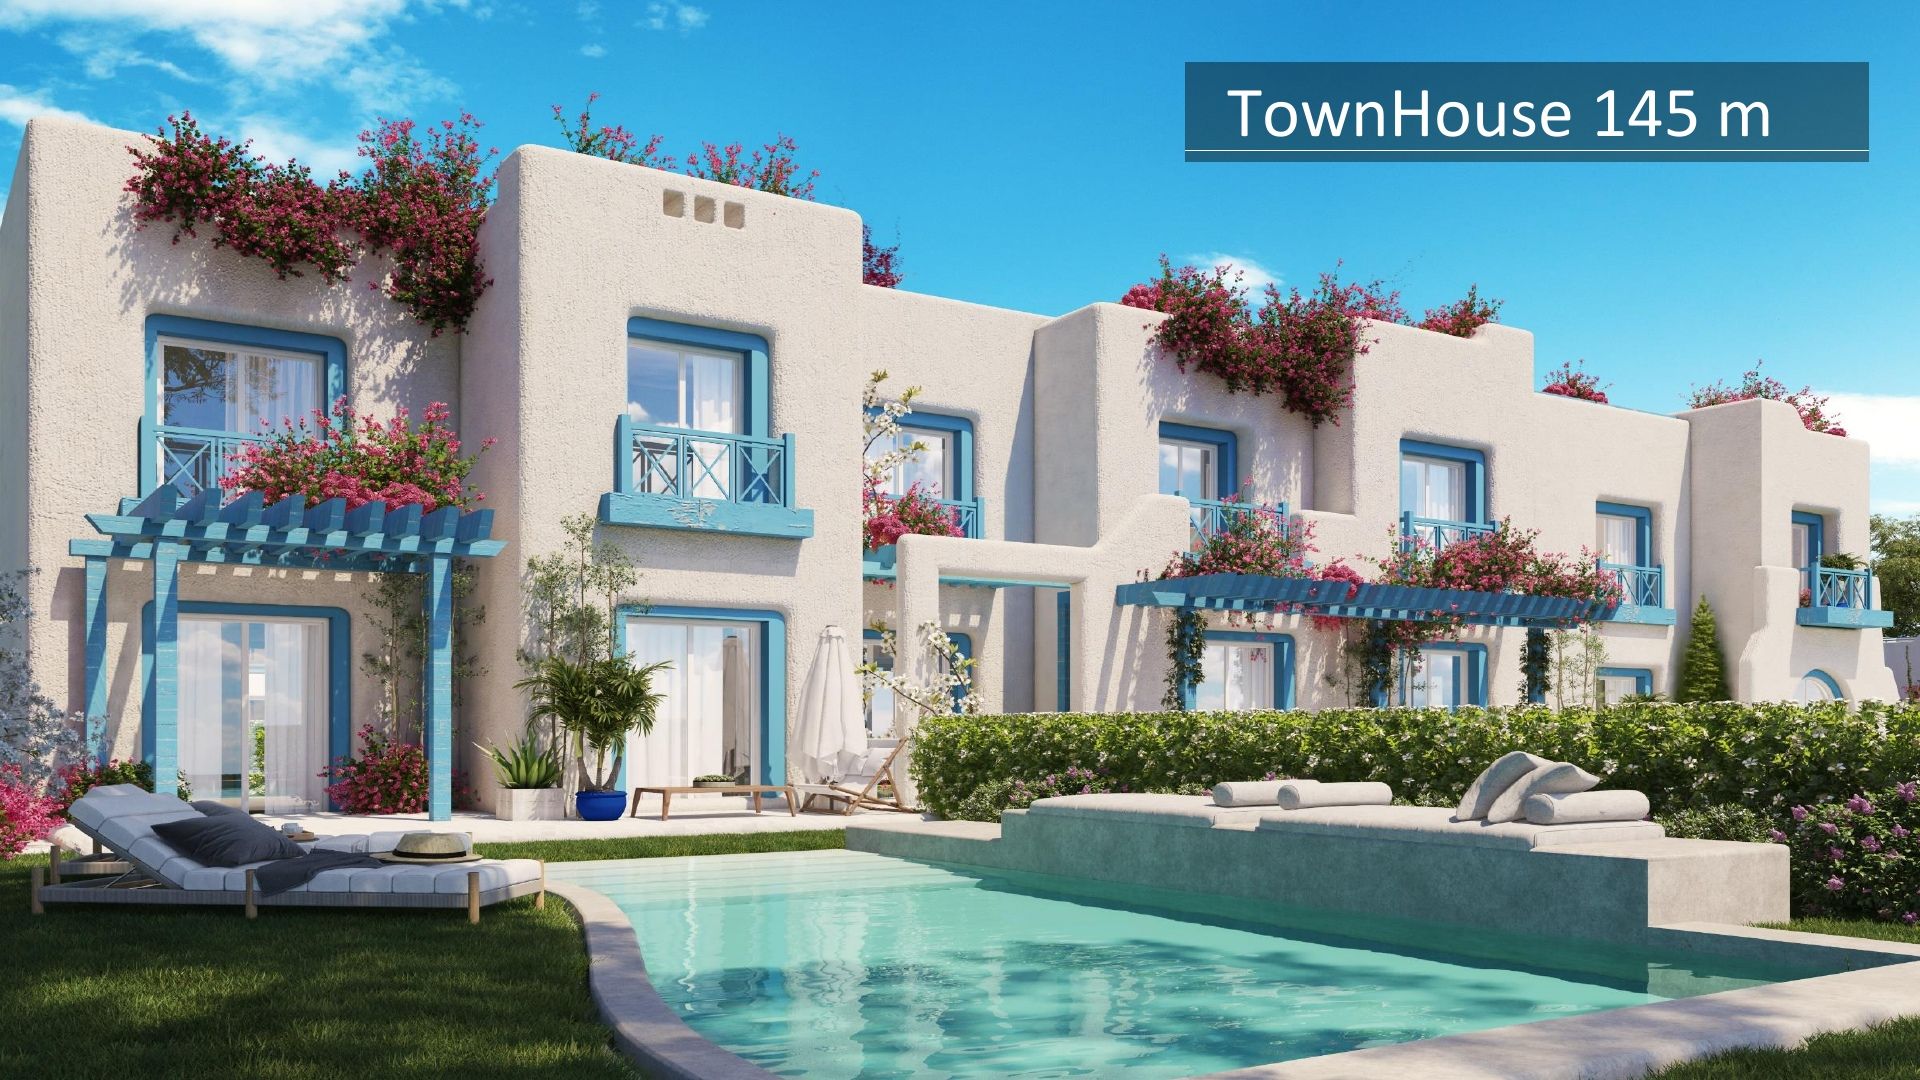 With an area of 167 m² Twin House for sale in Crete Island Al Sahel